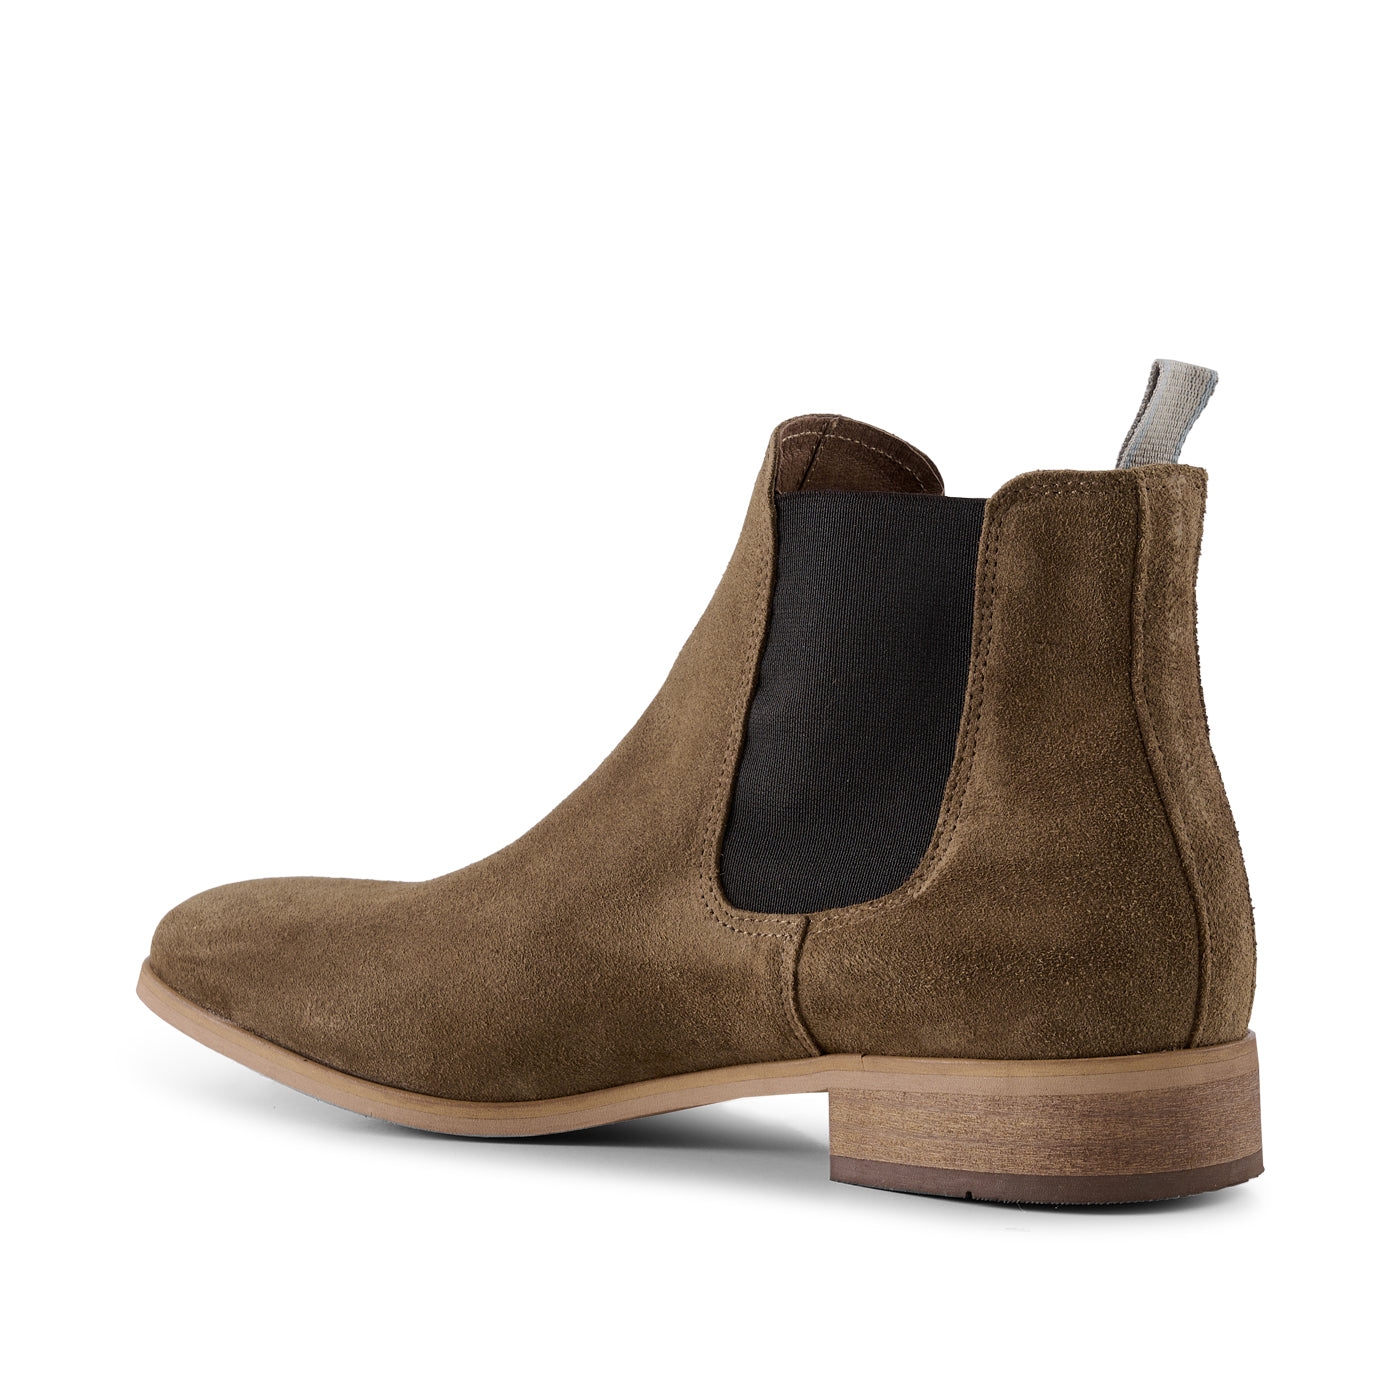 SHOE THE BEAR MENS Dev chelsea boot suede Chelsea Boots 135 TOBACCO